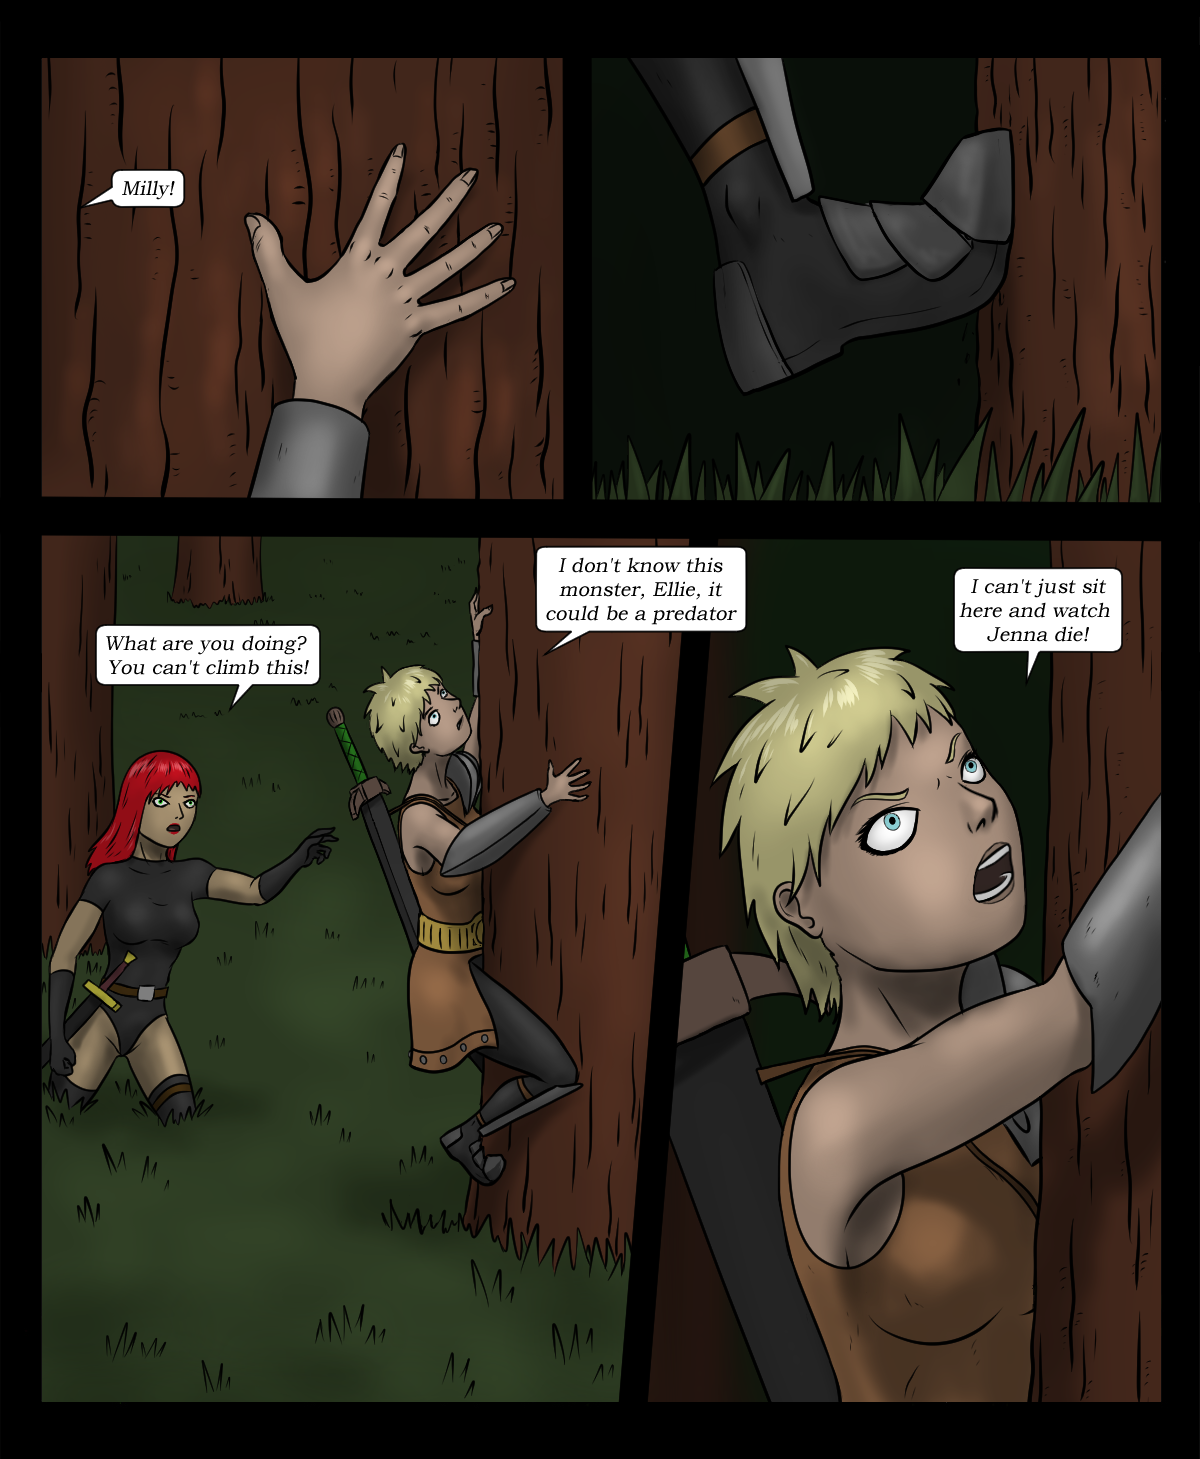 Page 74 - Doing something